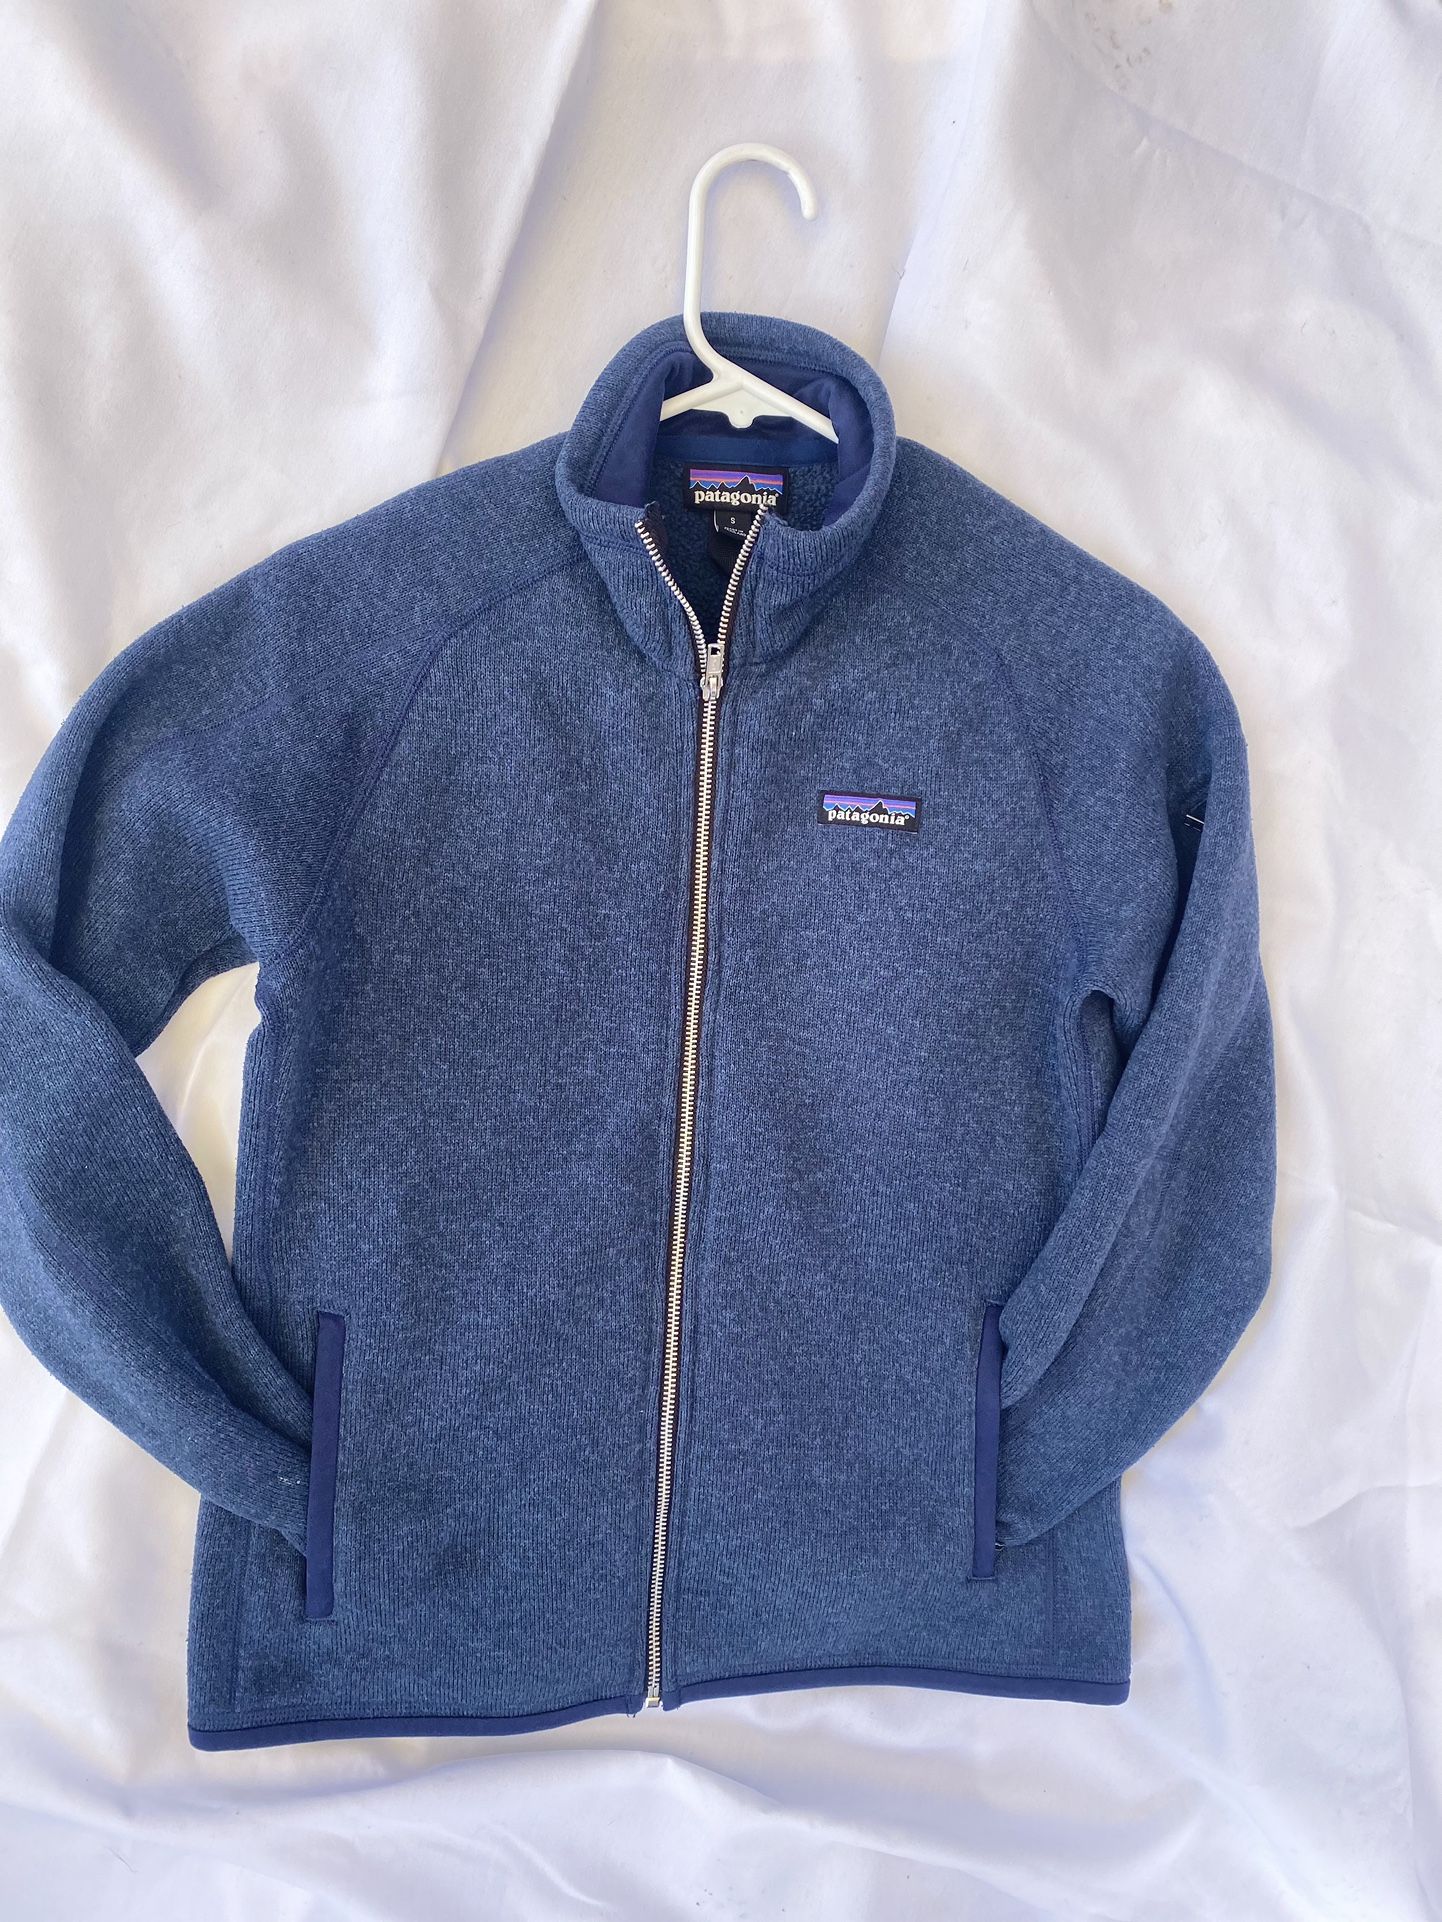 Patagonia De Mujer Size.  S.  $36 Each 